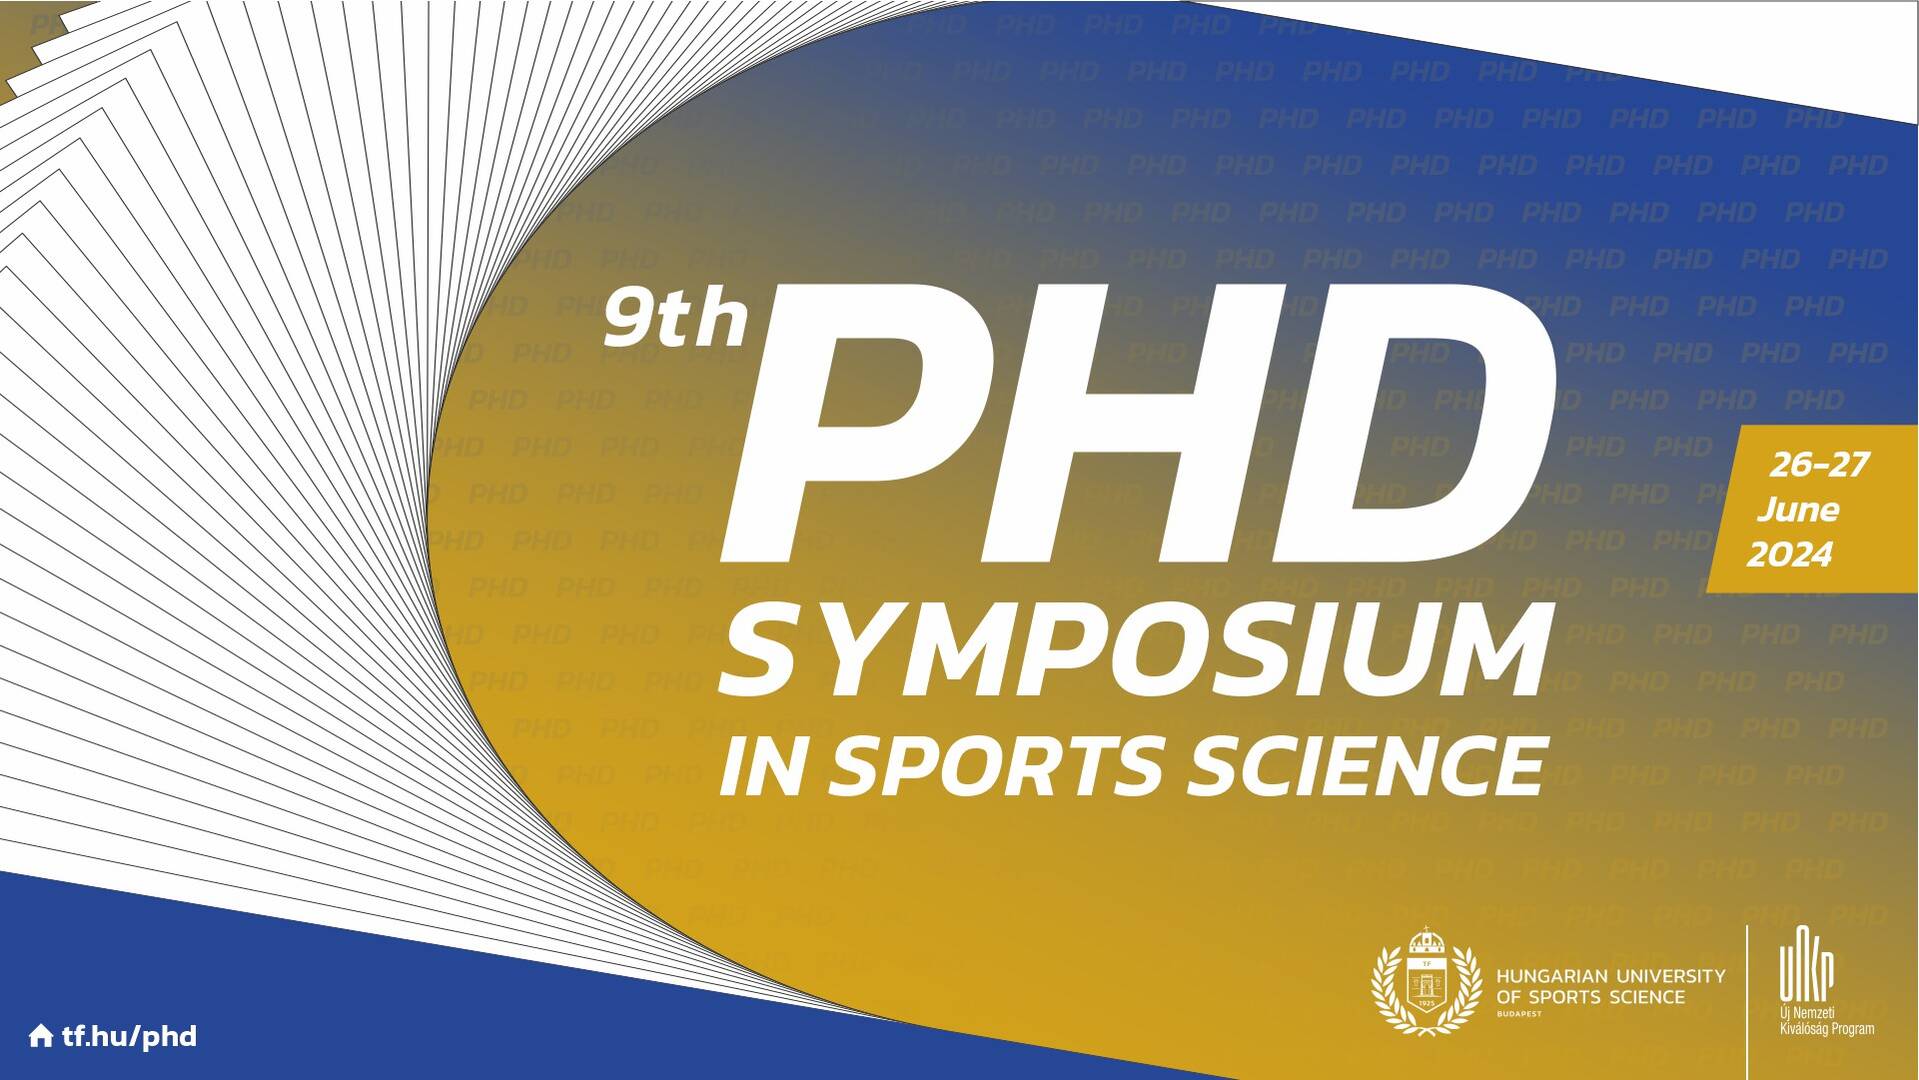 Call for application: 9th PhD Symposium in Sports Science